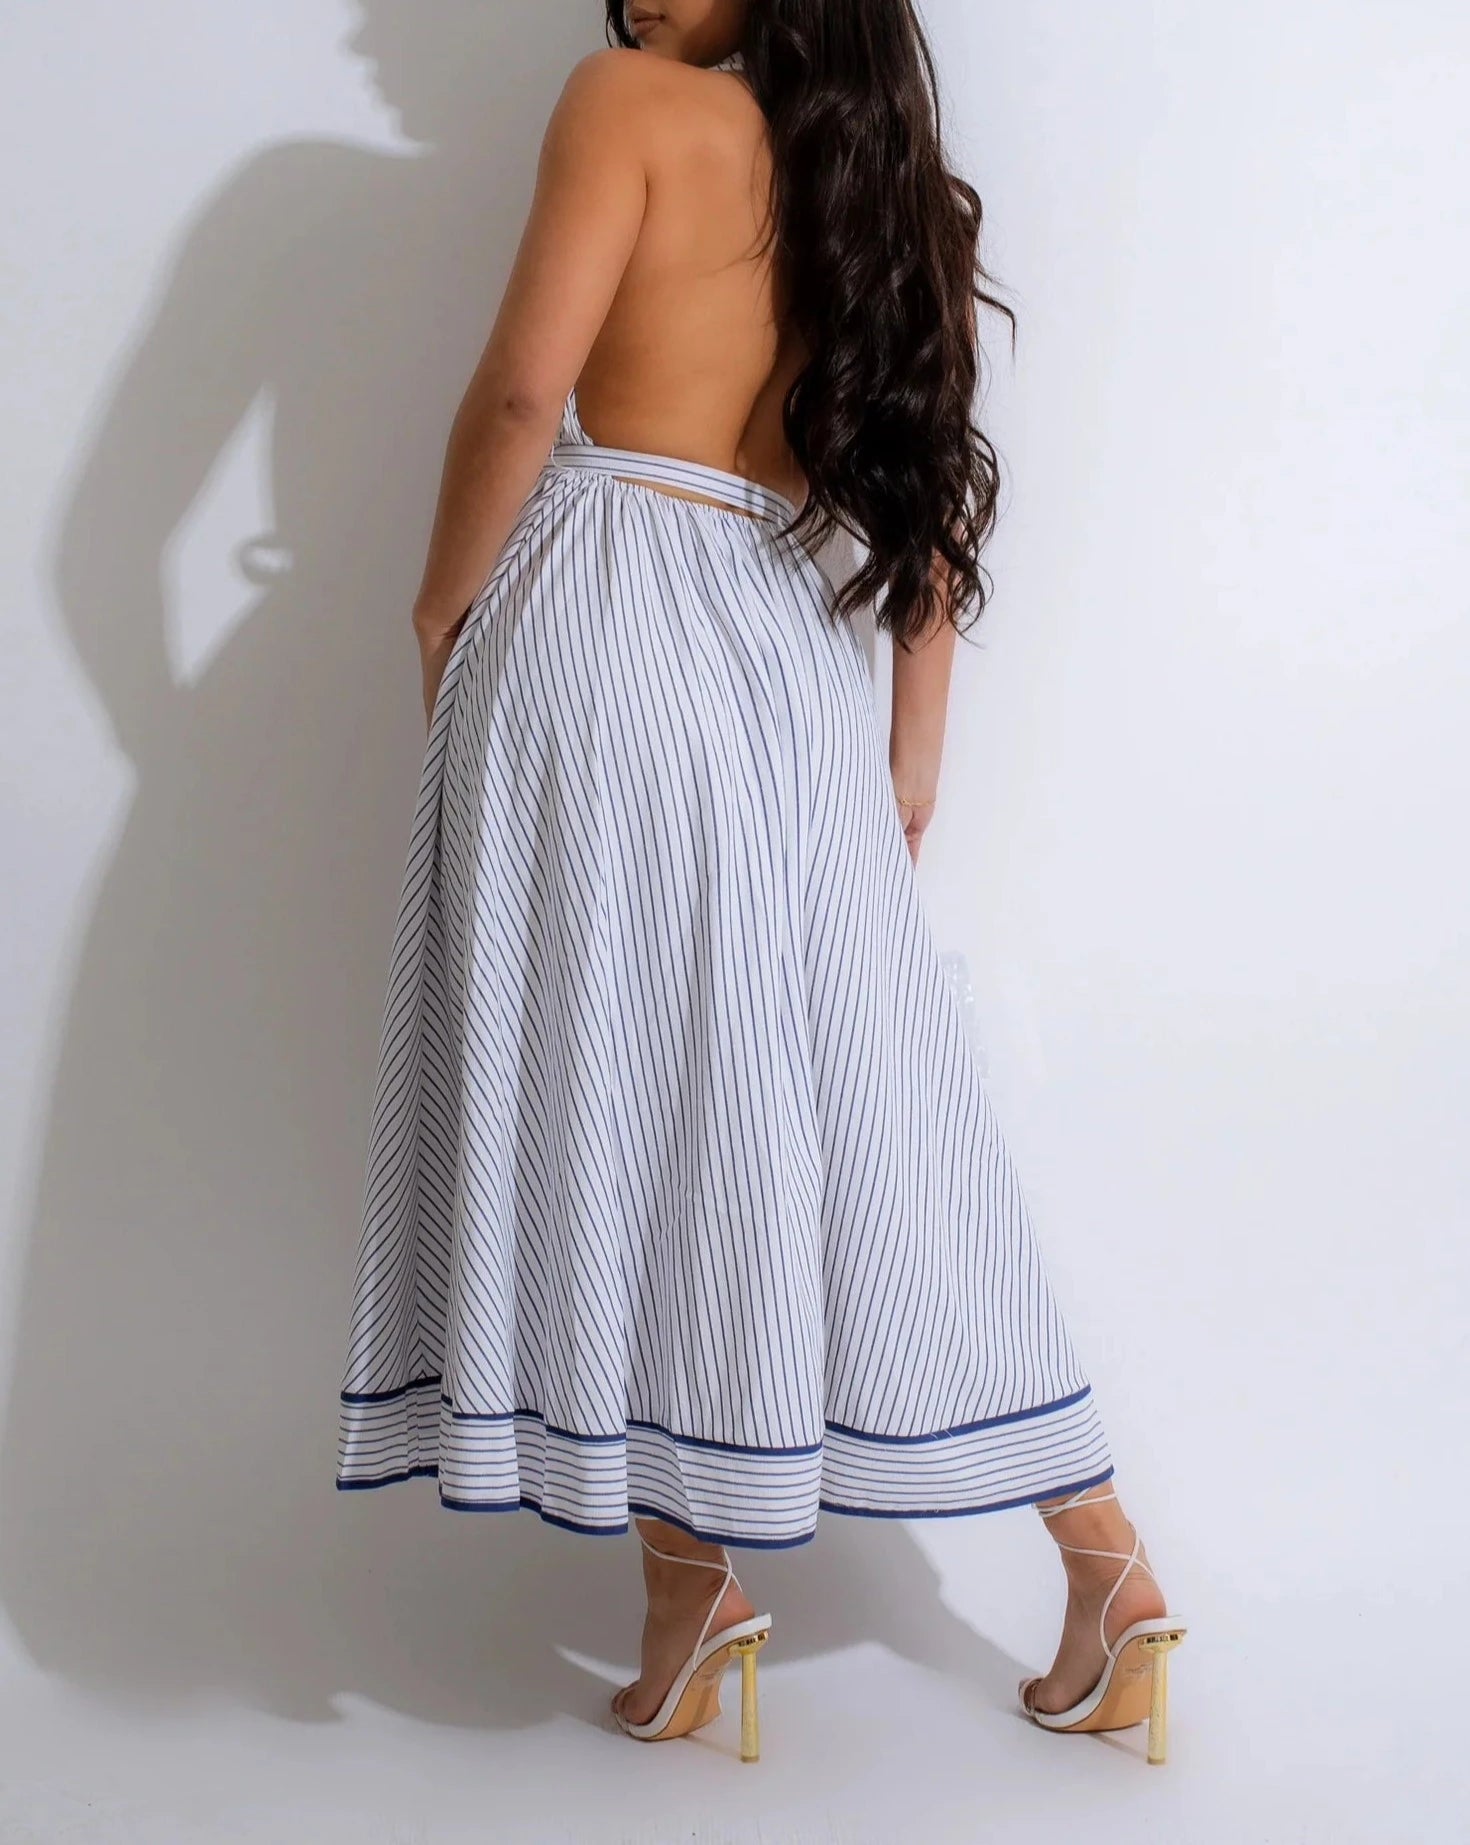 Pinstripe Millionaire Bae Midi Dress BlueSimplyDerri

Elevate your style with elegance through our Pinstripe Millionaire Bae Midi Dress, a sophisticated garment that adds a modern touch to a classic design. This refinDressPinstripe Millionaire Bae Midi Dress Blue